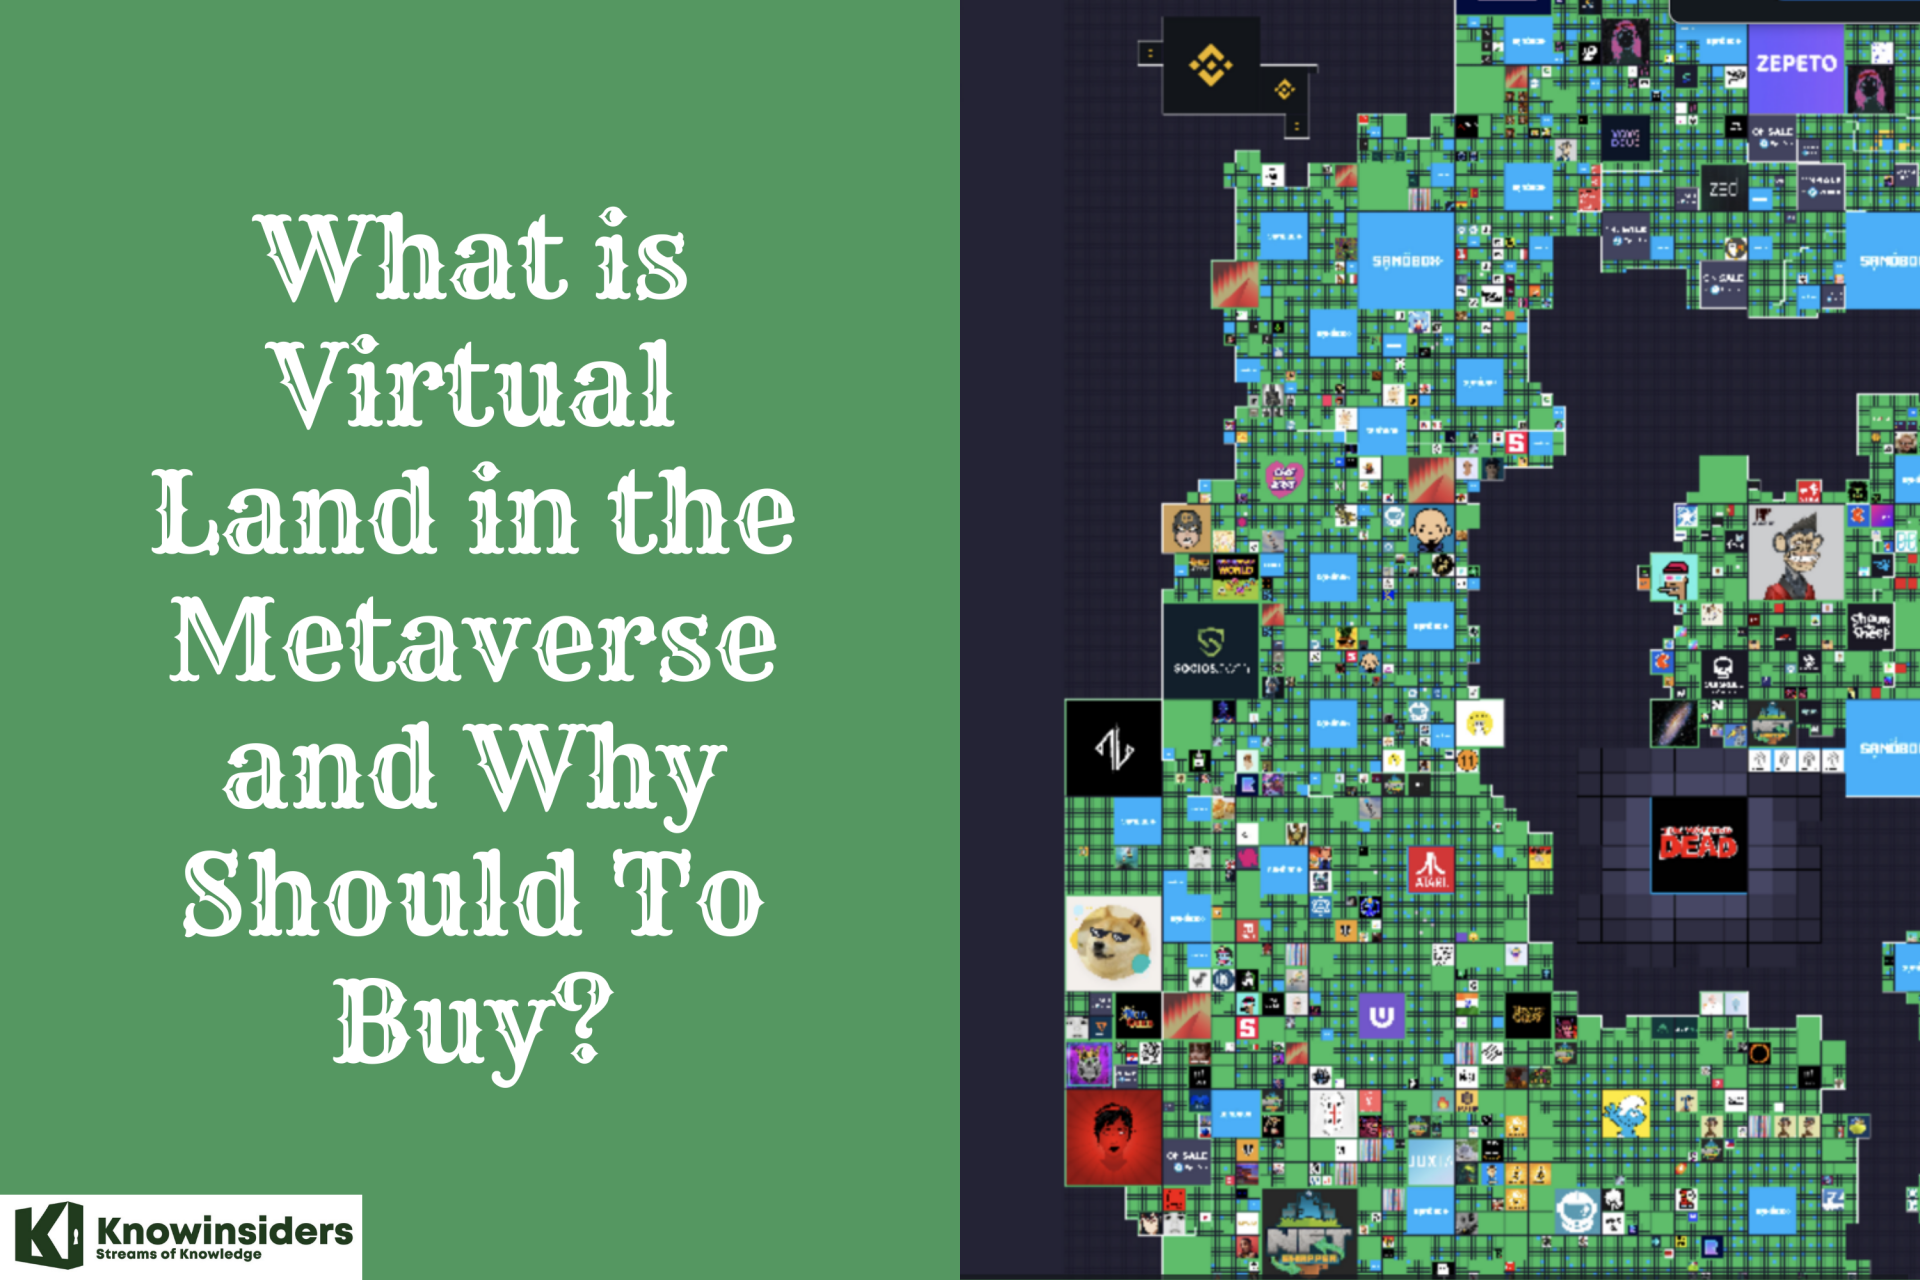 What is Virtual Land in the Metaverse and Why Should To Buy?